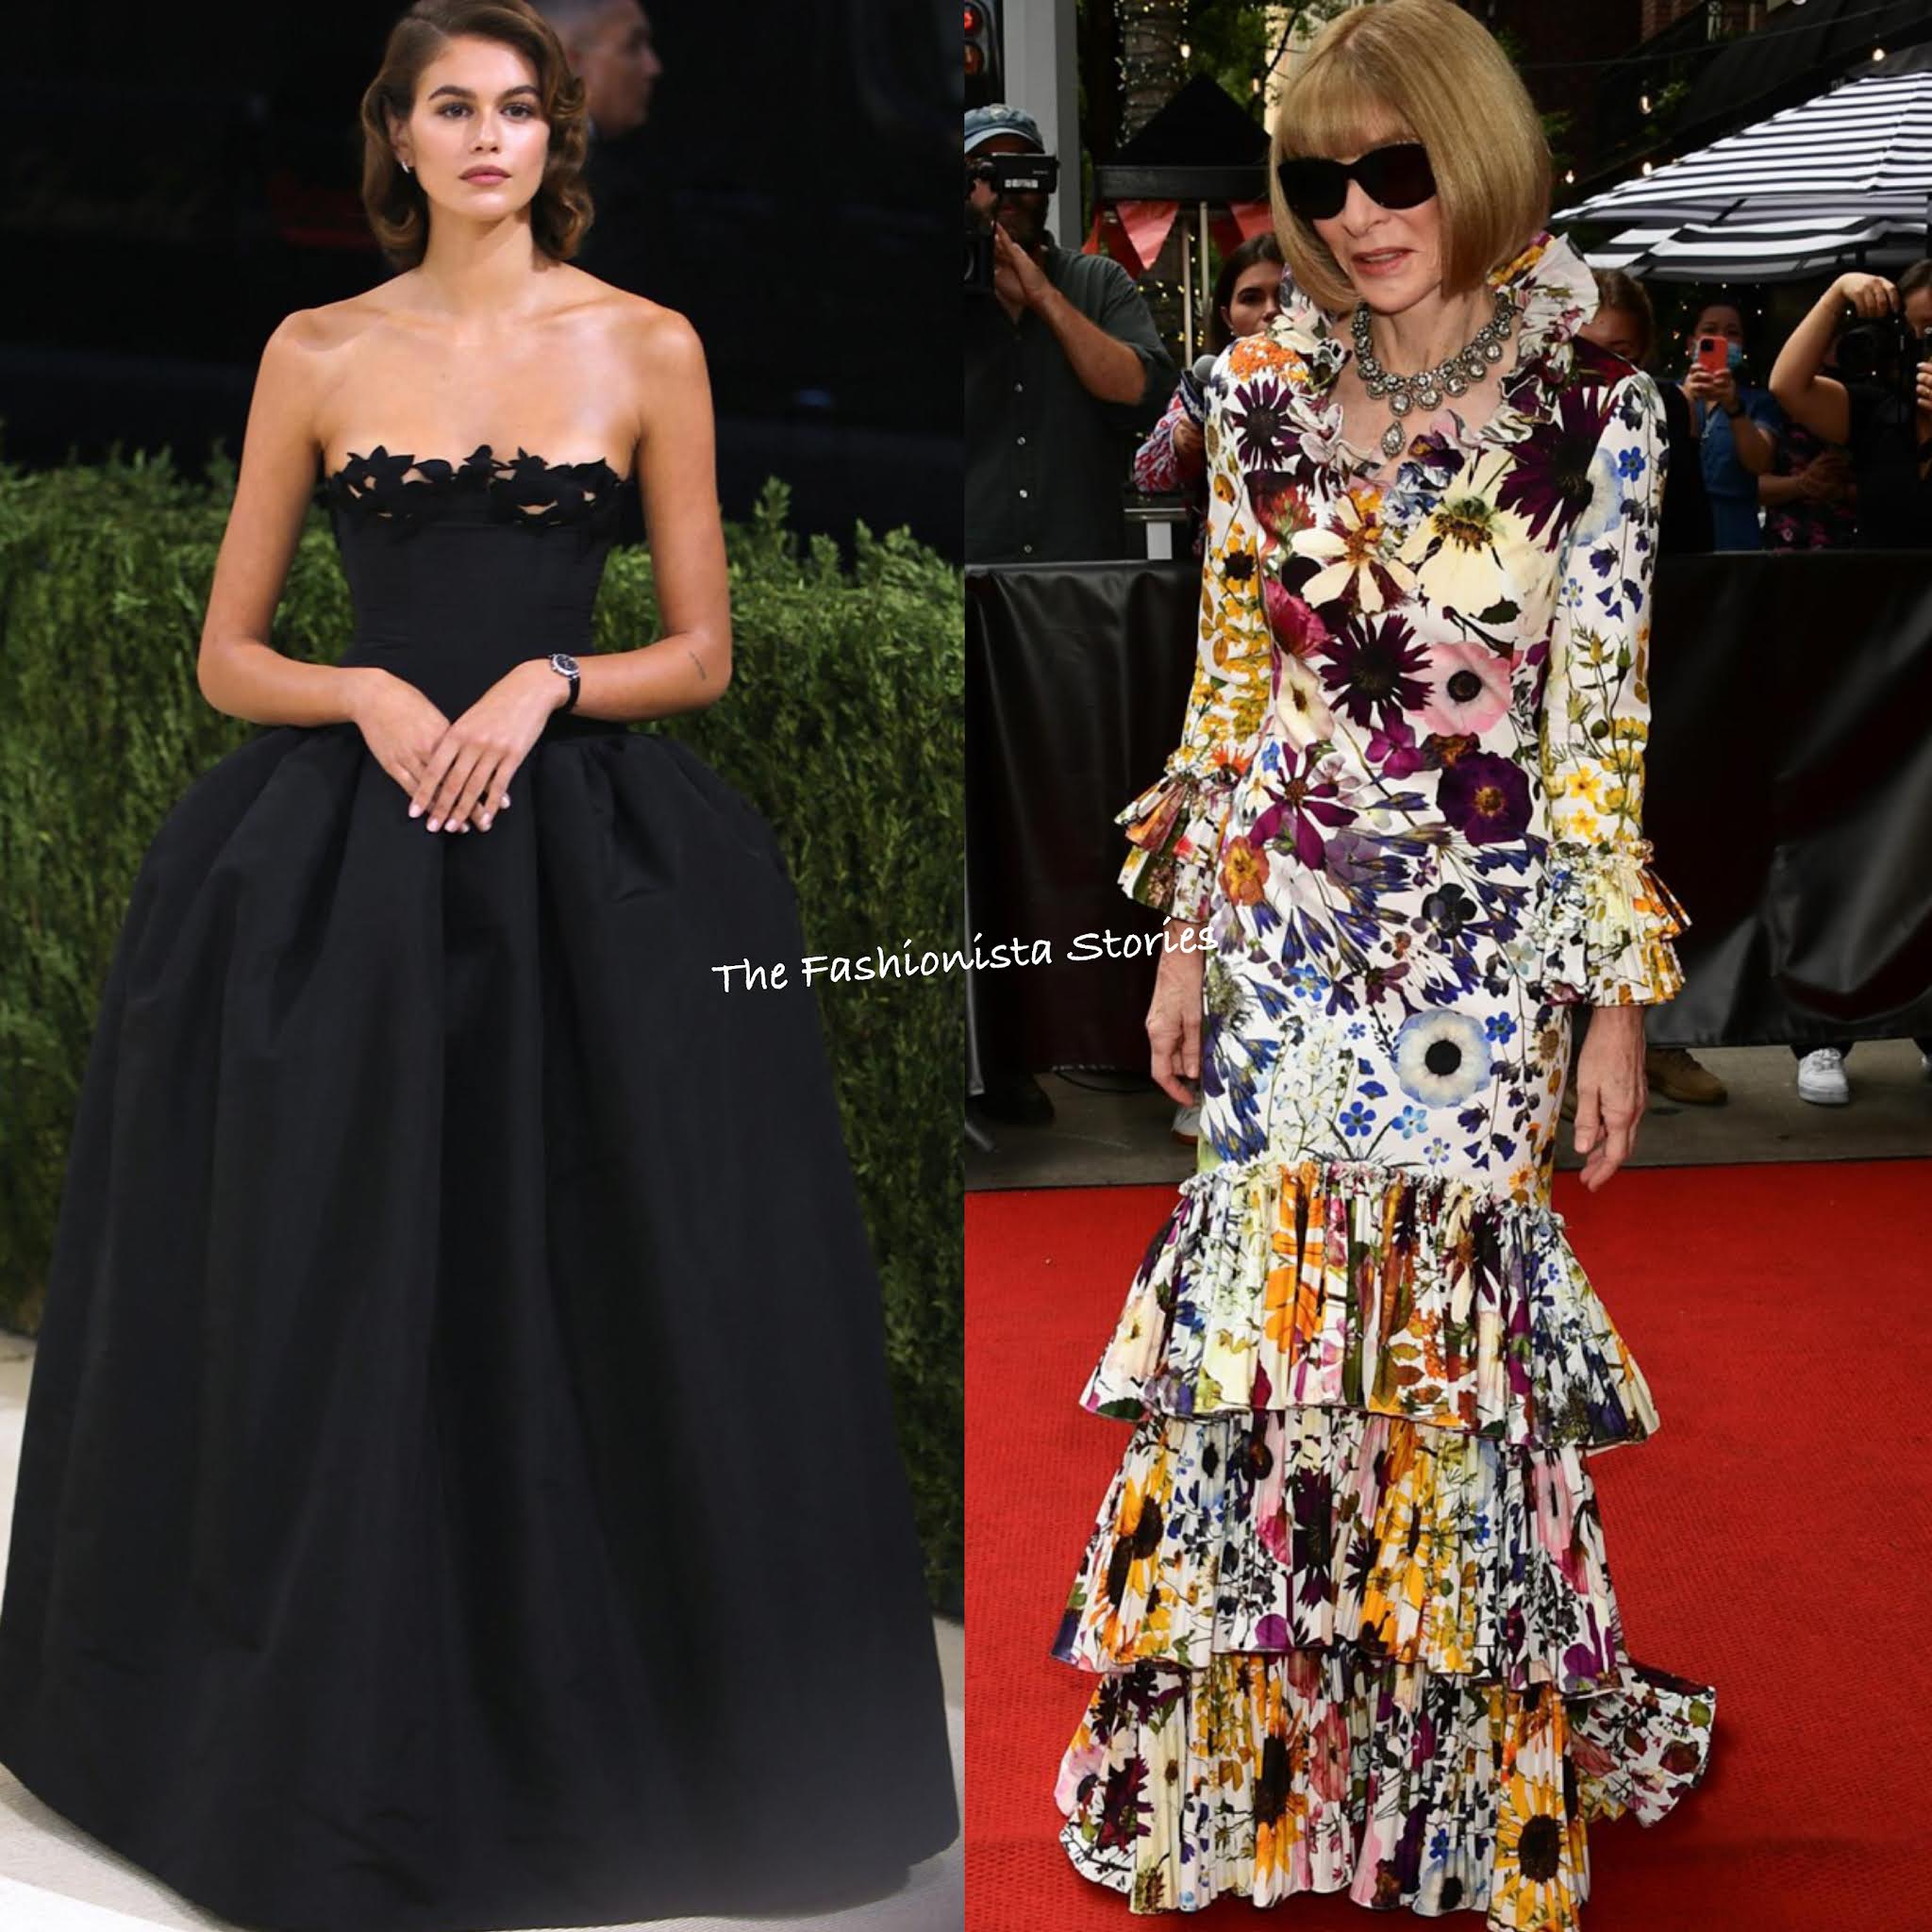 Met Gala dress: Purchase your very own gown for £69.99, thanks to